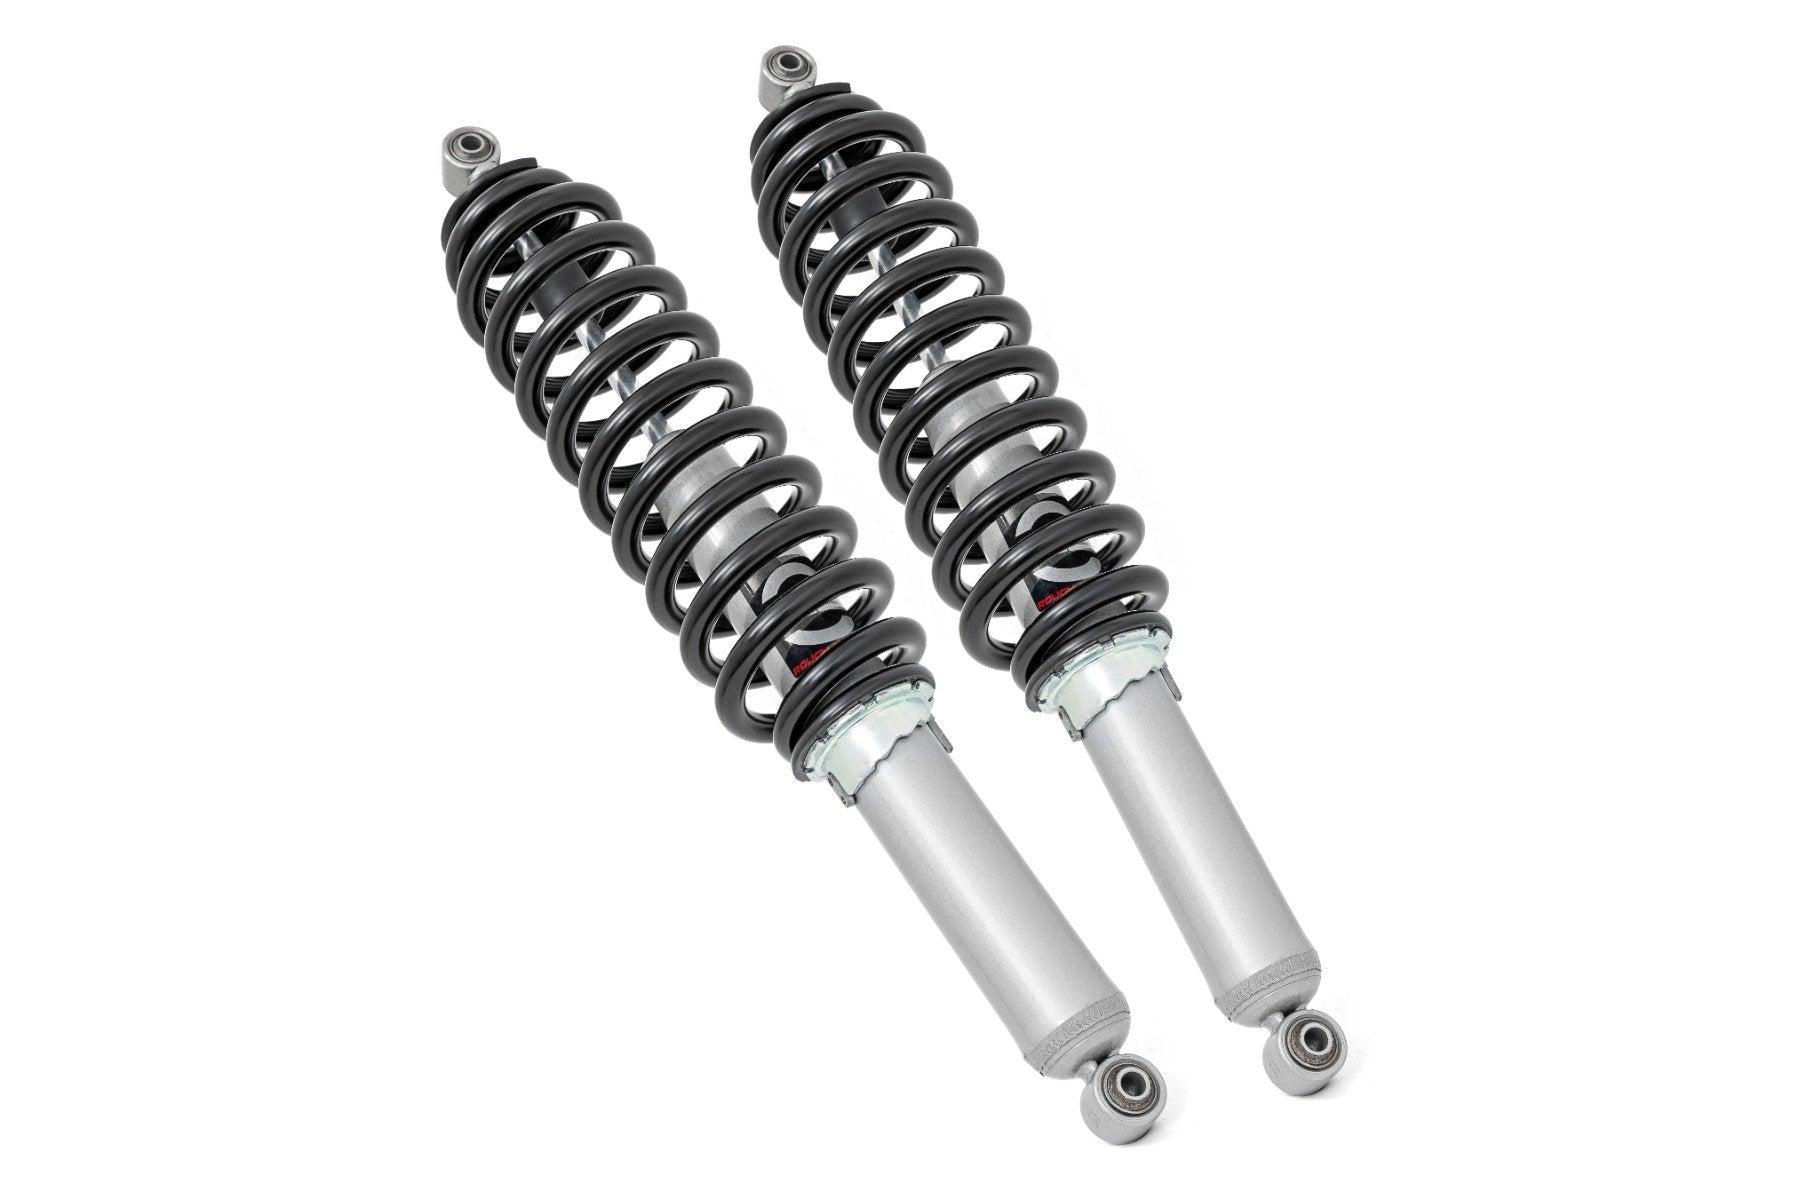 N3 Polaris Coil | Offroad | Over Rear & – Performance Extreme Shocks Stock Ranger